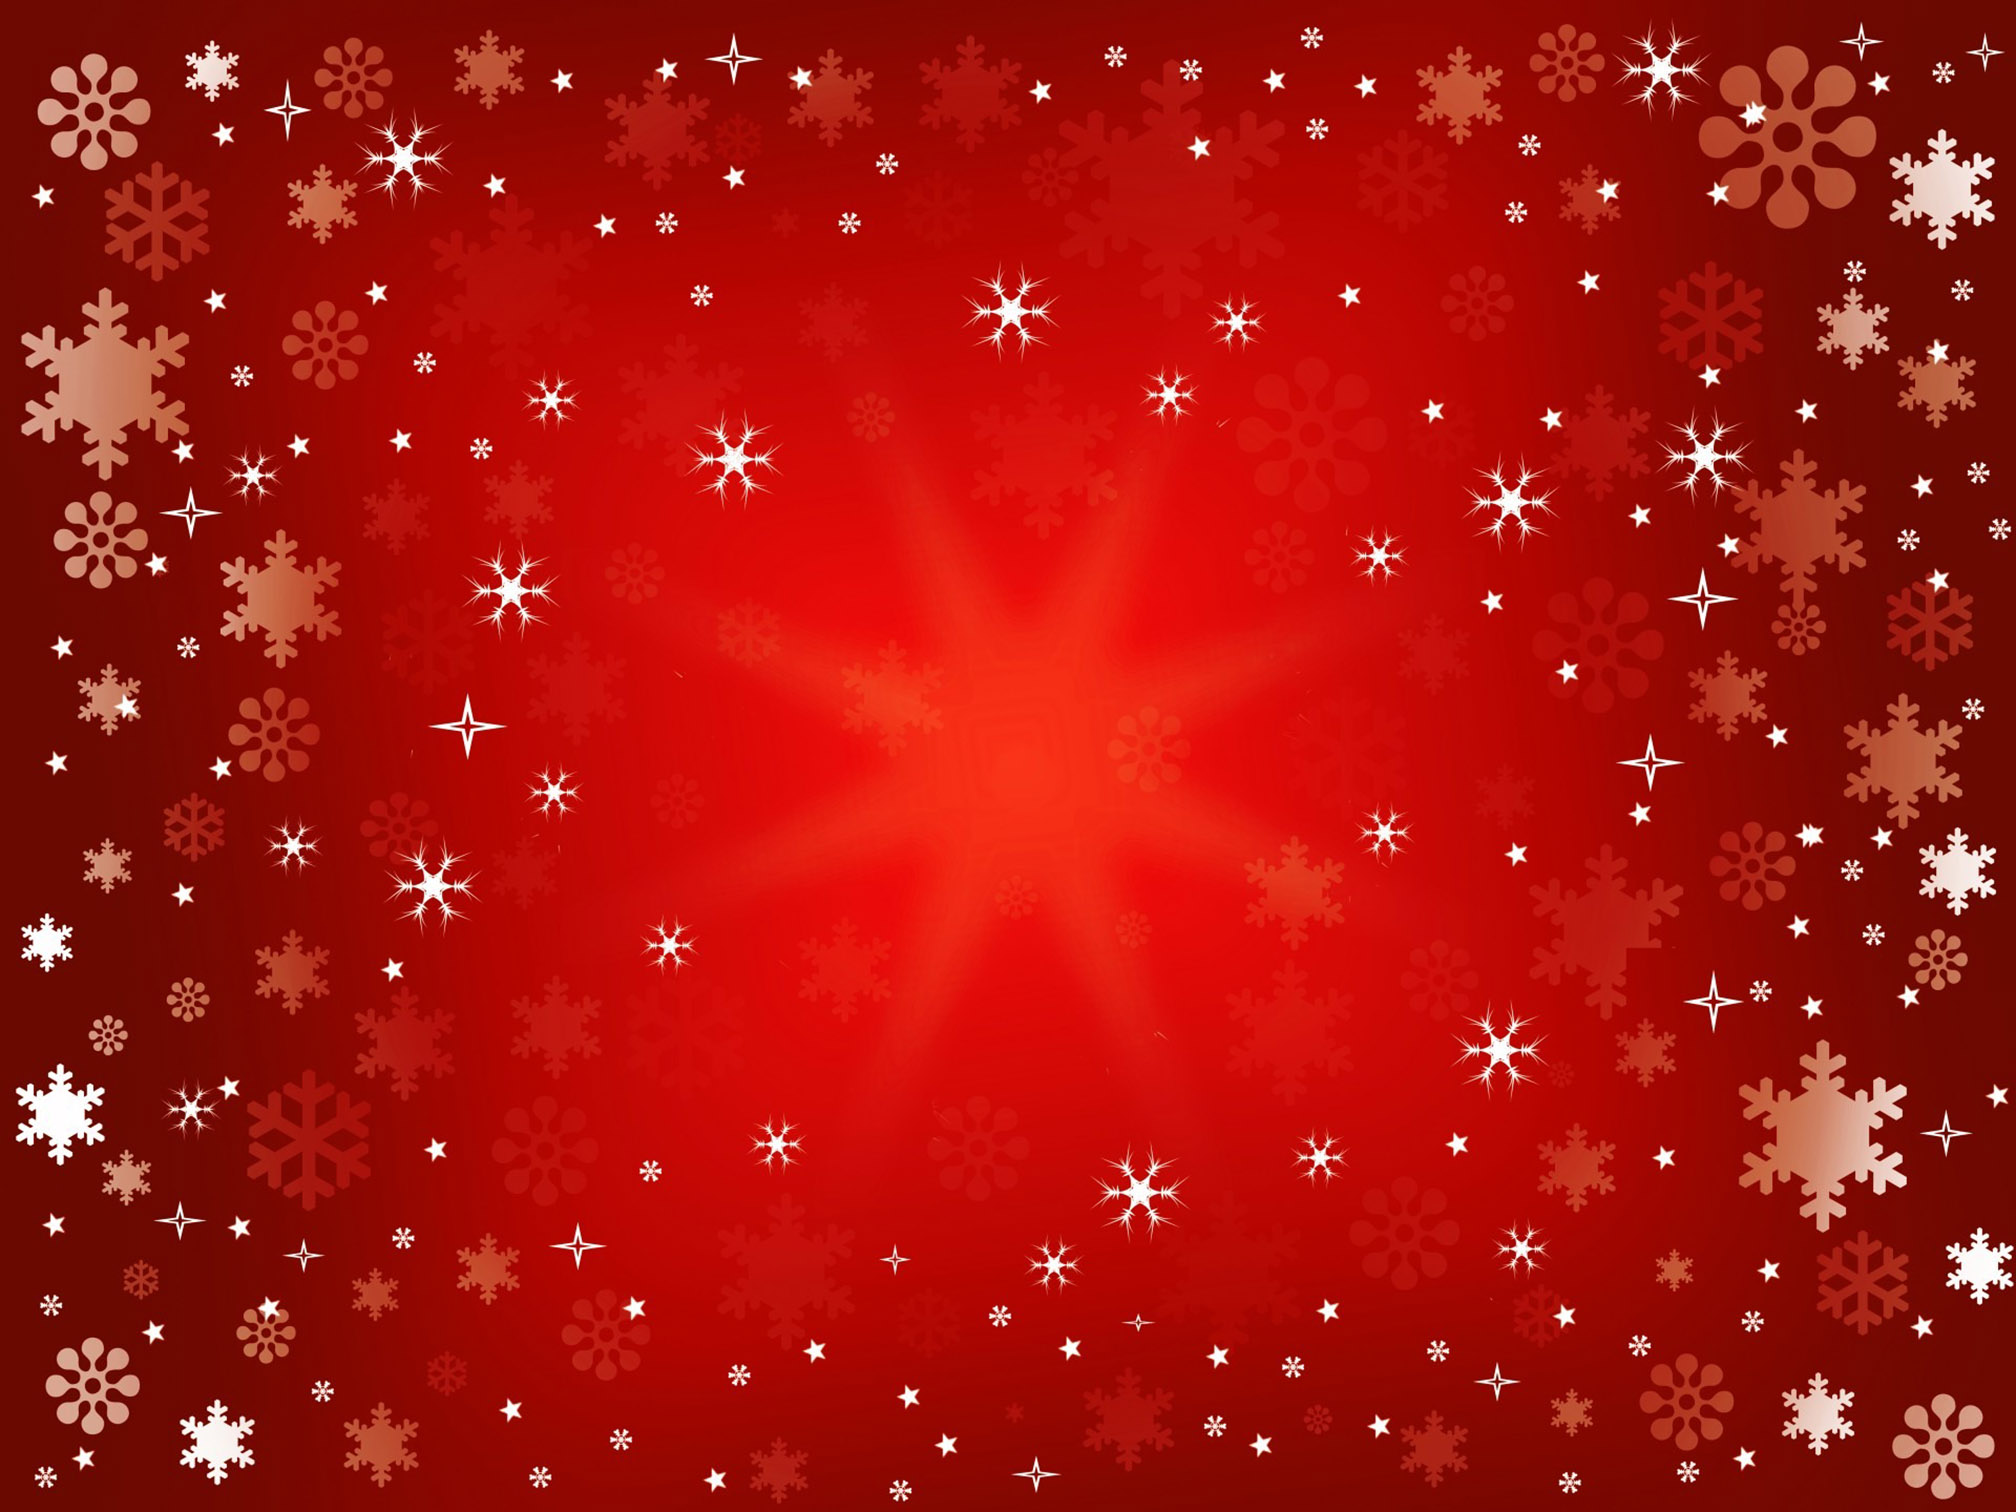 35 Stars at Xmas Background Images Cards or Christmas 2016x1512